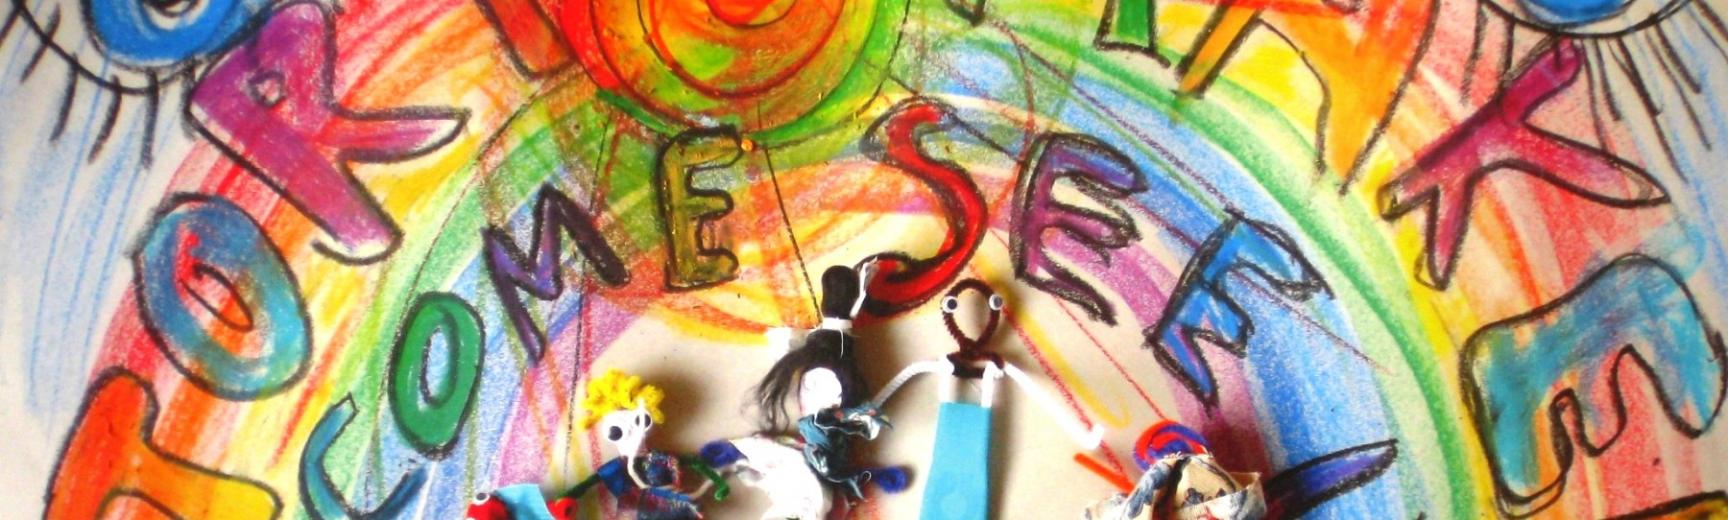 Story Makers artwork featuring a rainbow and many colourful characters